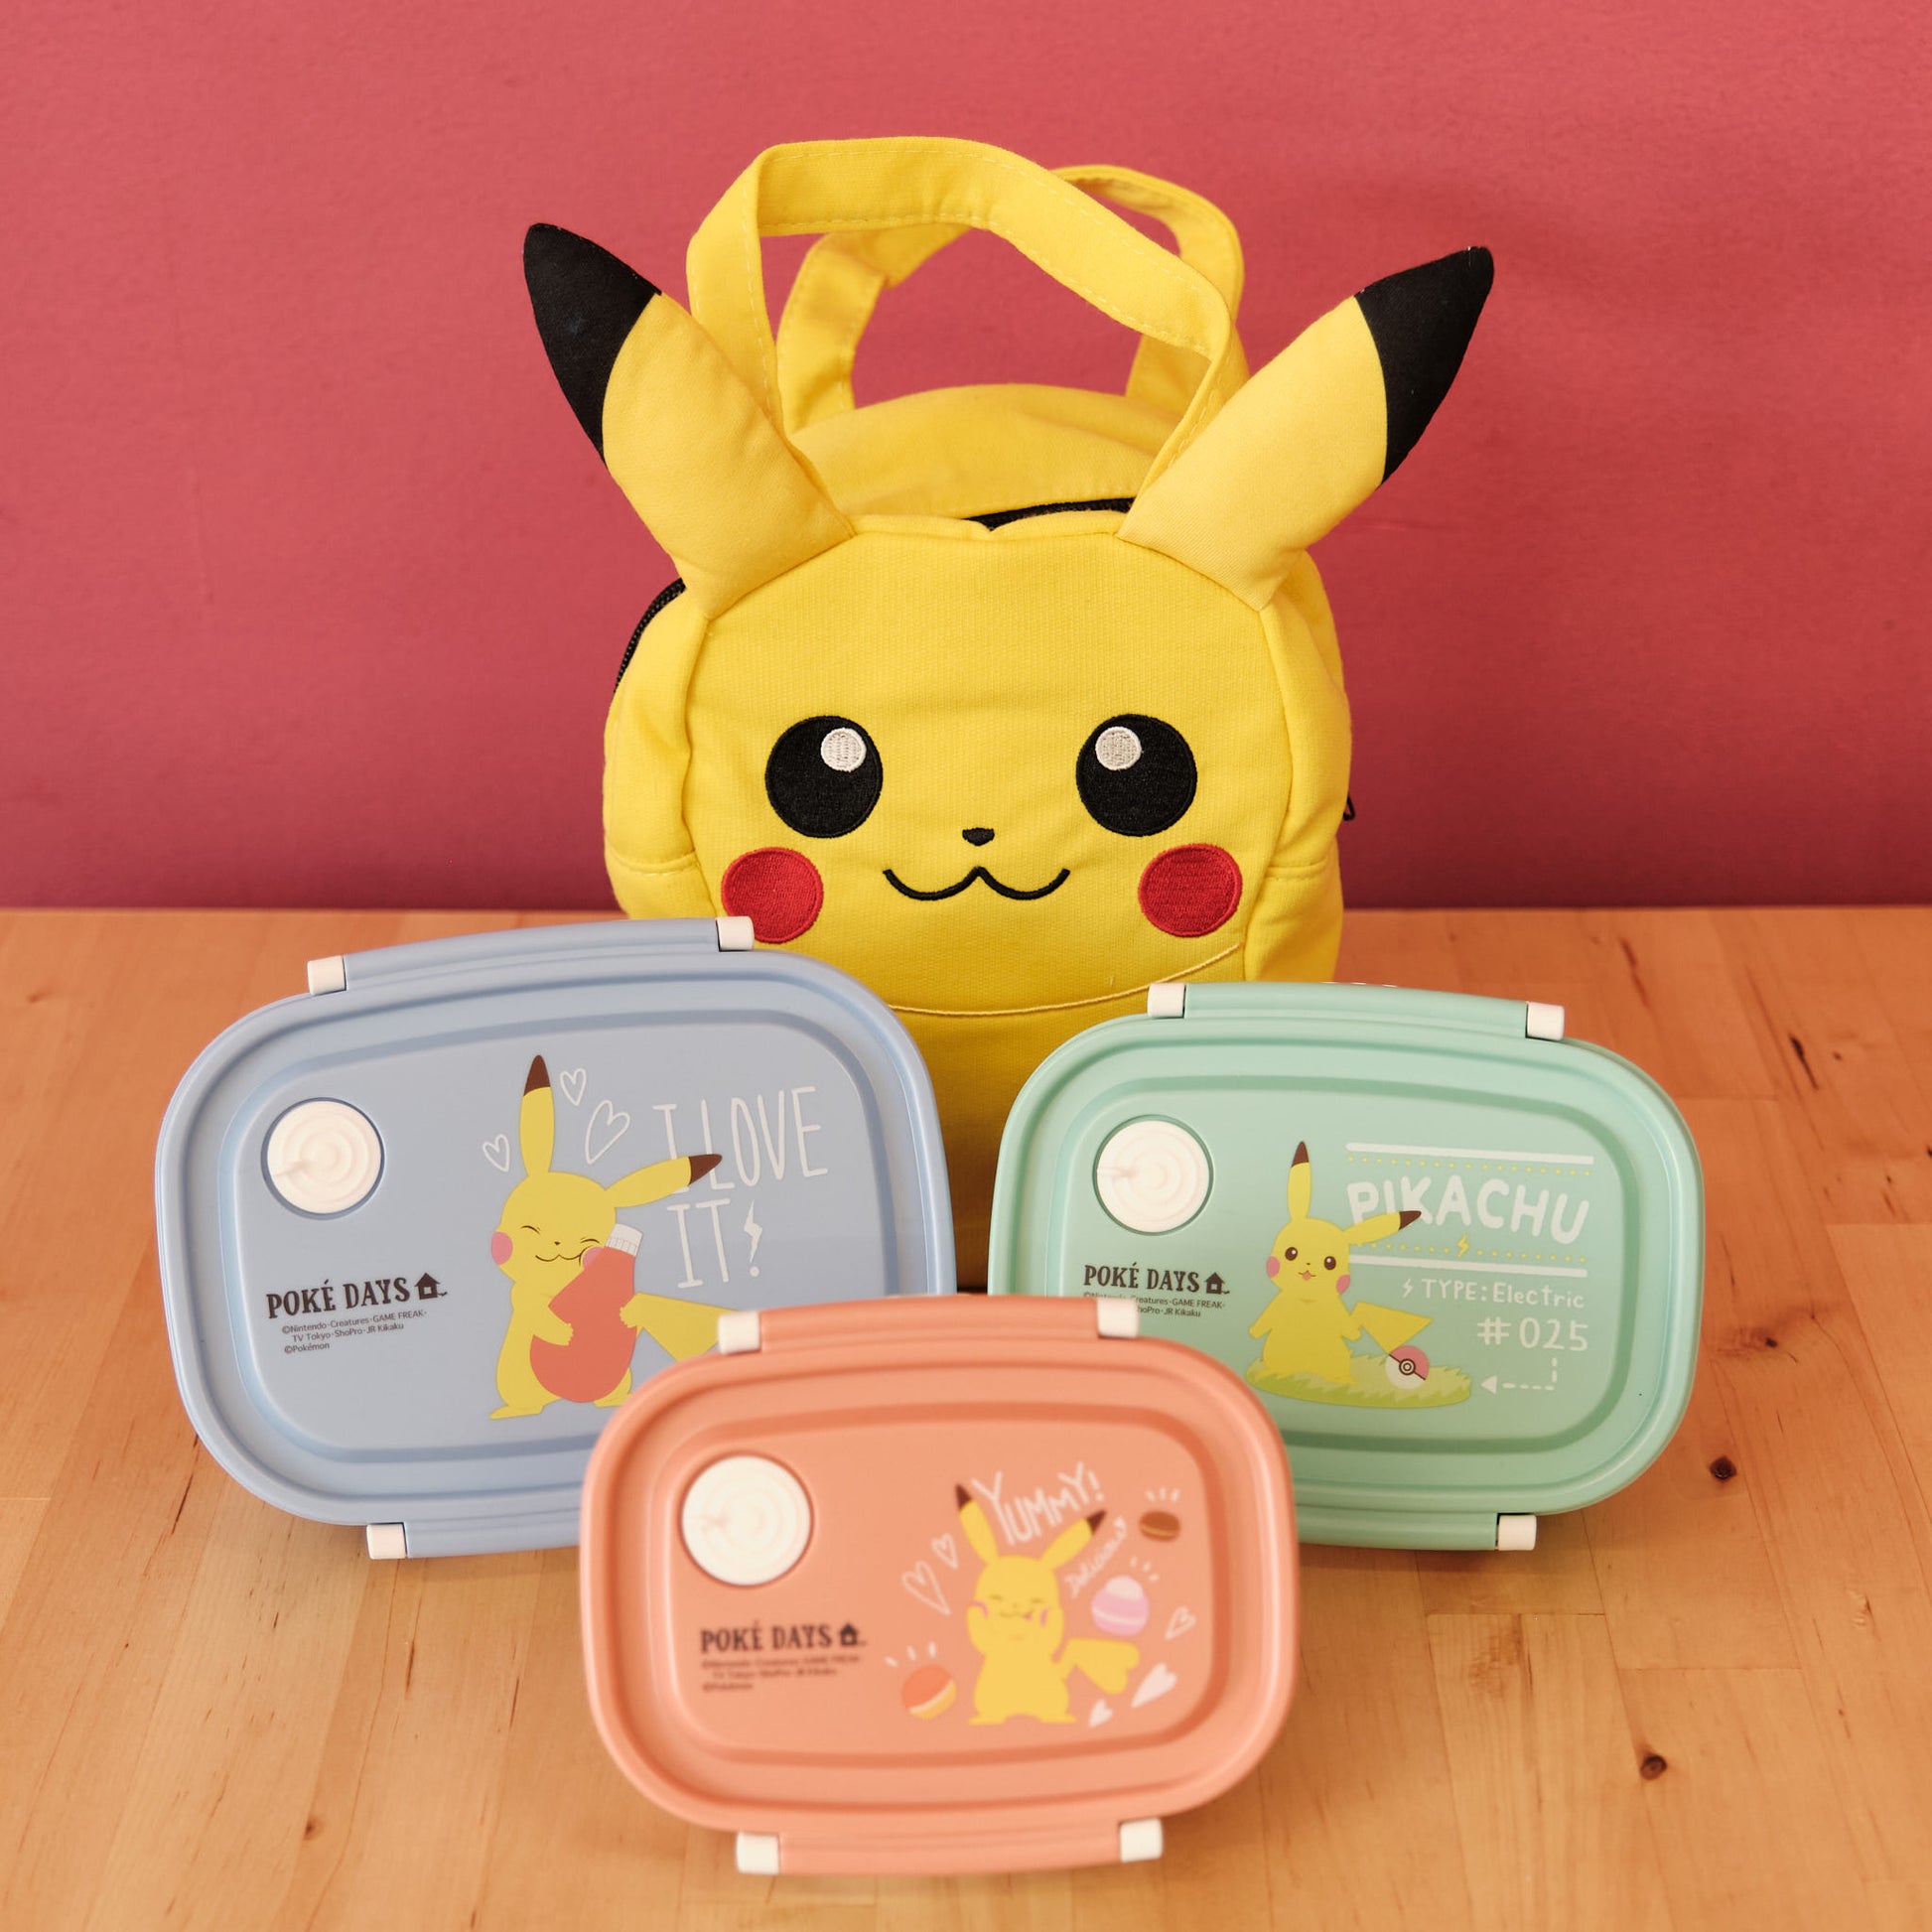 Make Your Own Pikachu Lunchbox! – Only In Japan